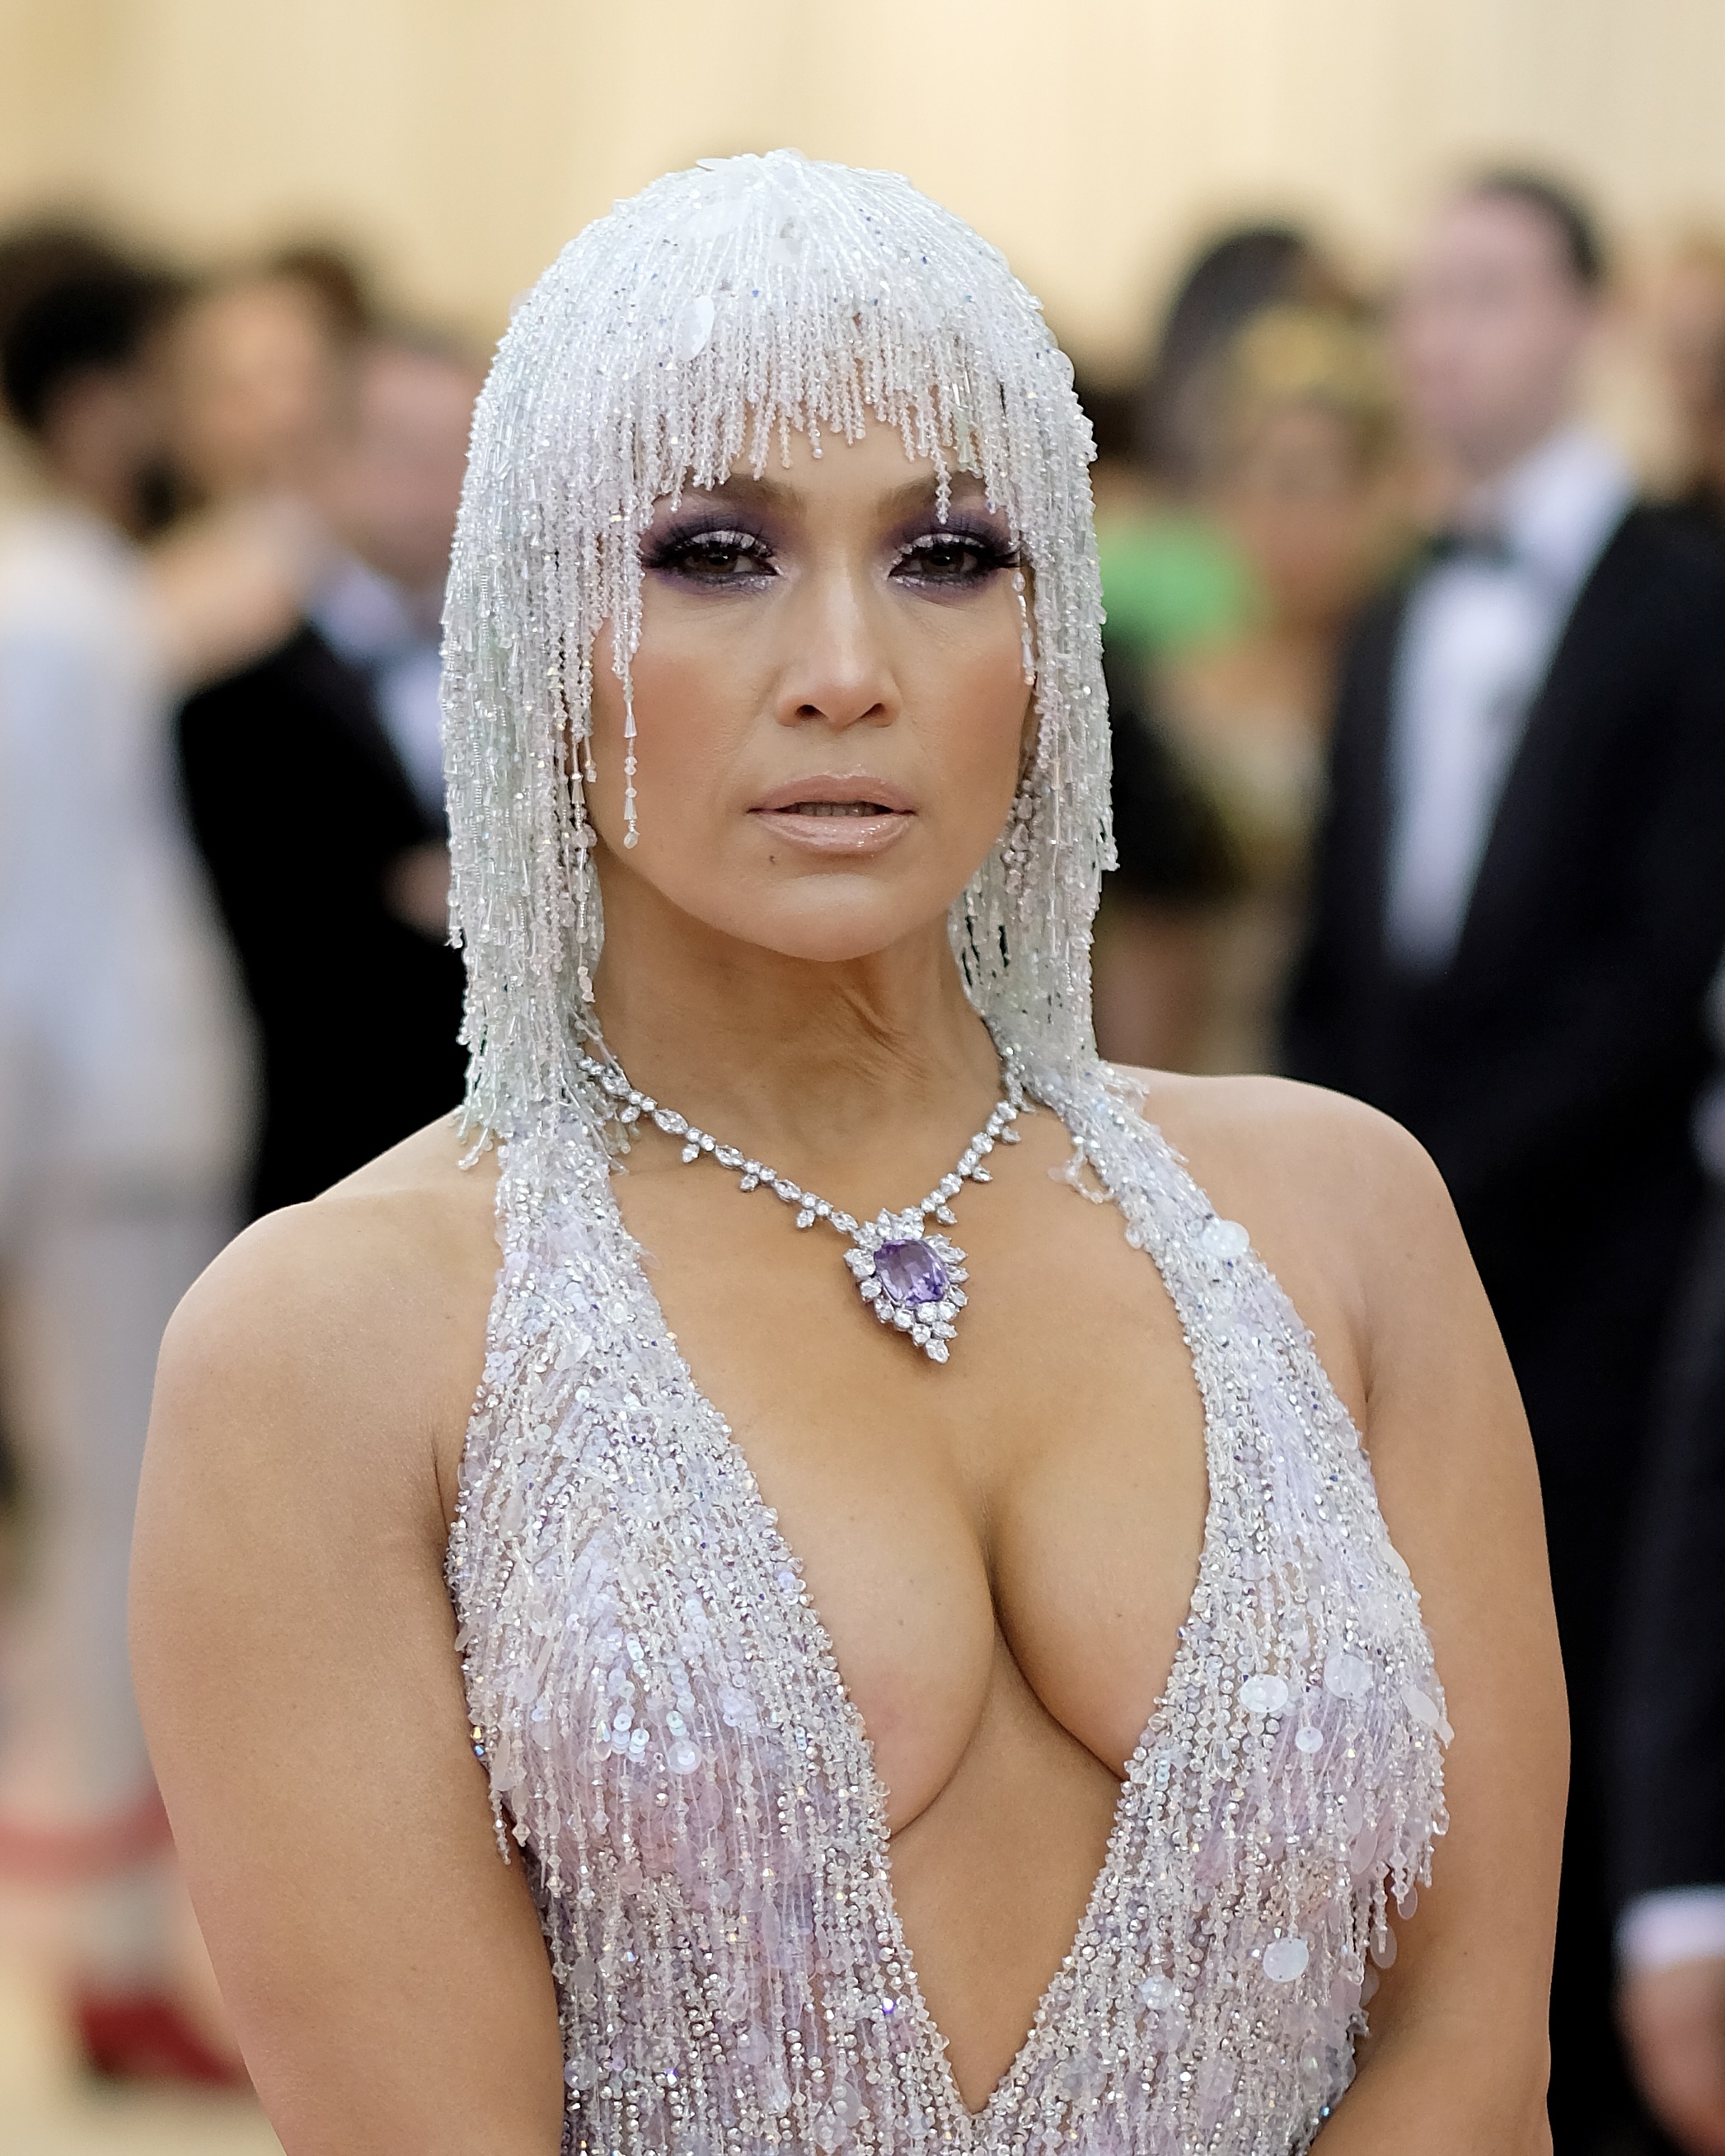 Jennifer Lopez shined in natural diamond jewelry at the 2019 Met Gala.